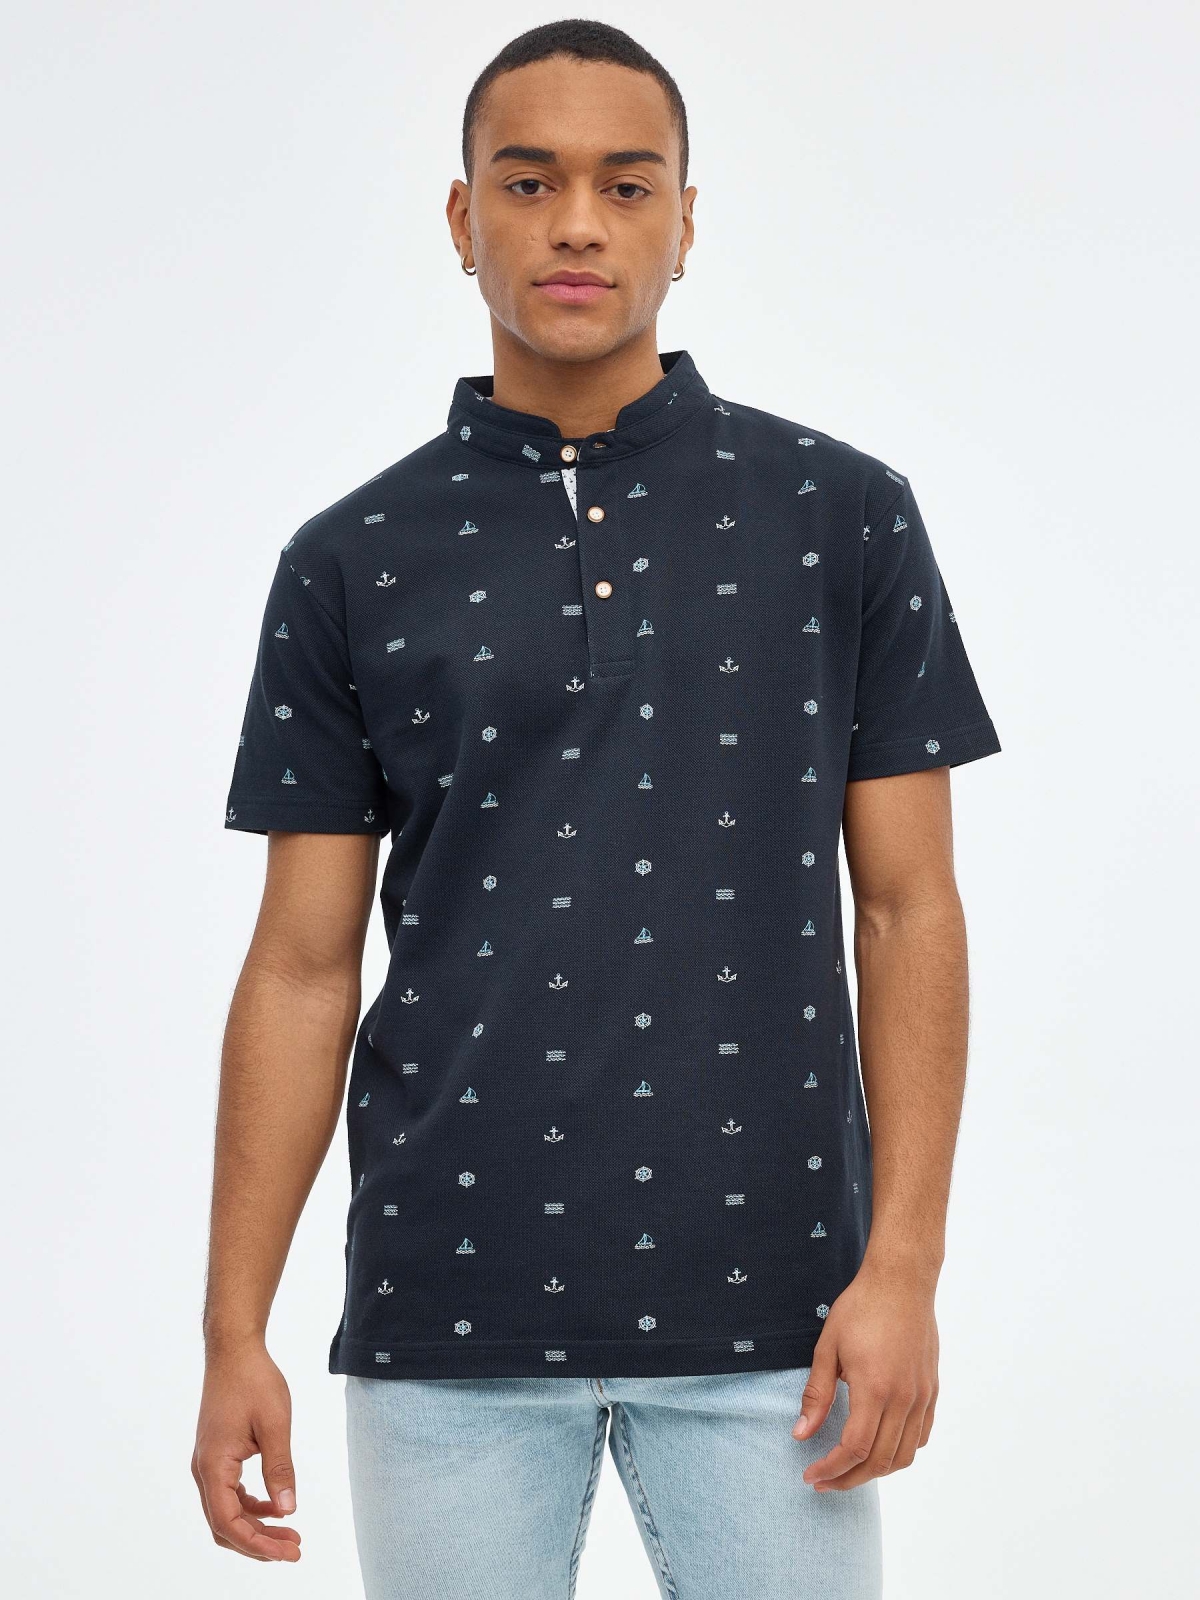 Sailor miniprint polo shirt navy middle front view